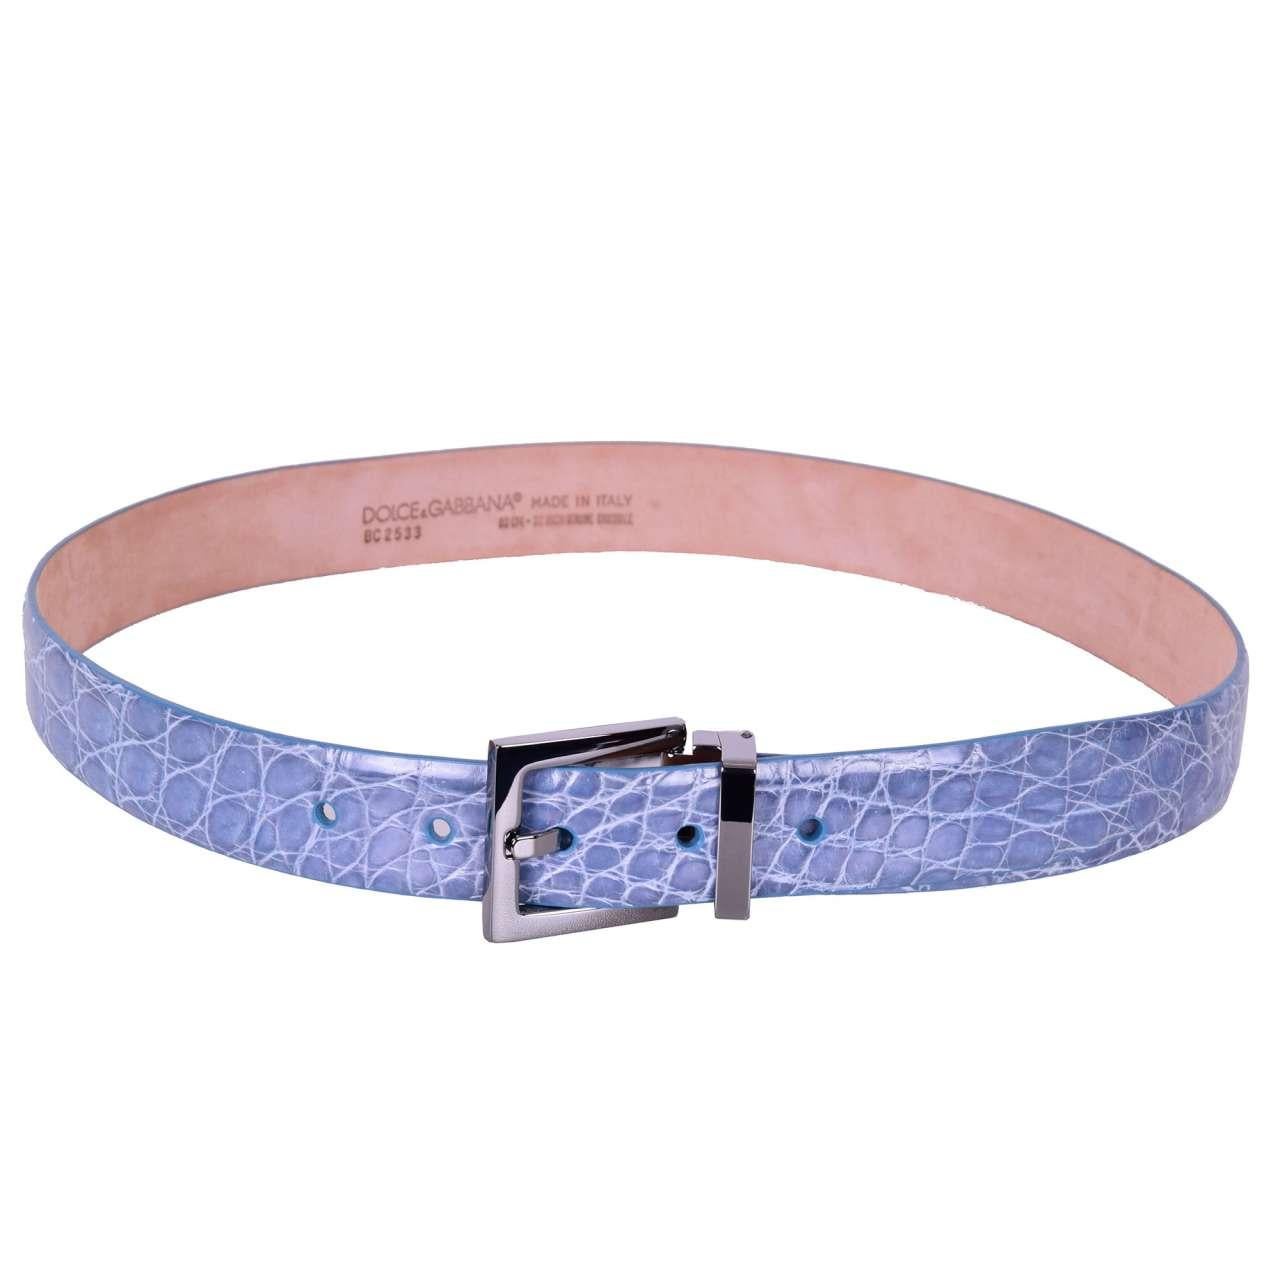 - Crocodile Leather (Caiman) belt with removable metal buckle in light blue by DOLCE & GABBANA Black Label - New with tag and dustbag - MADE IN ITALY - Former RRP: EUR 475 - Model: BC2633-A2856-80670 - Material: 100% Caiman - Width: 2,7 cm - Color: